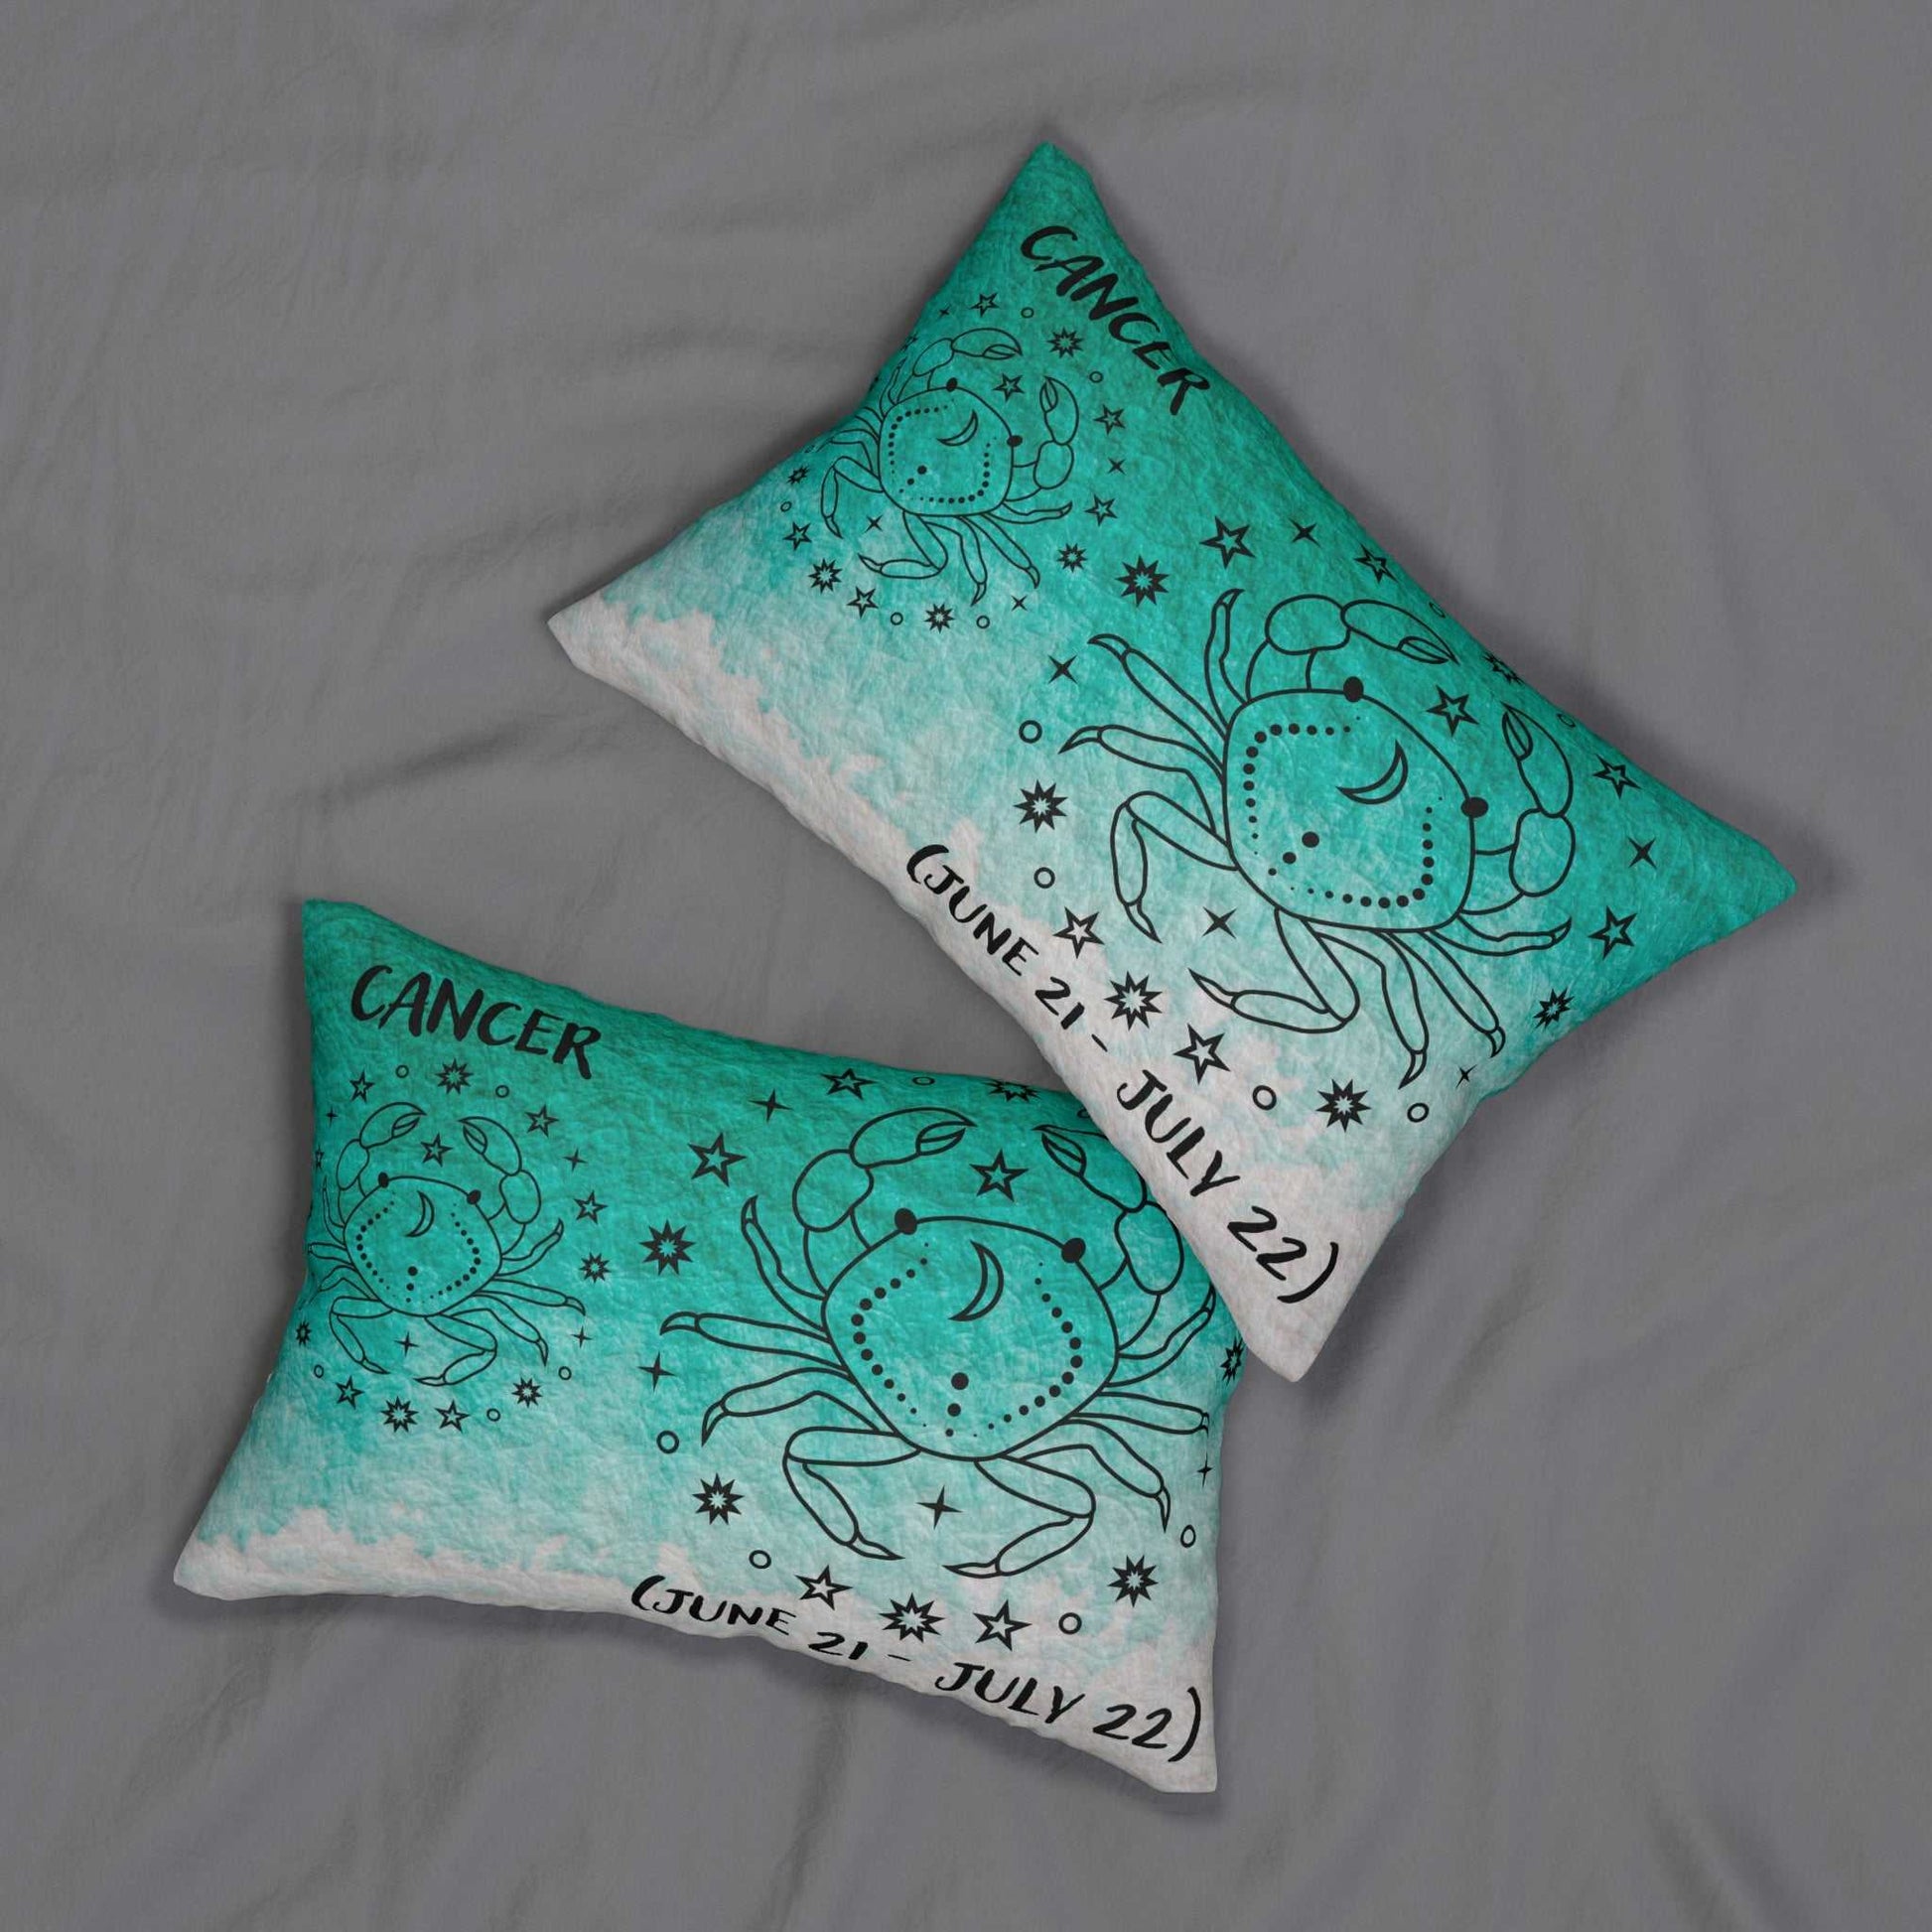 Cancer Spun Polyester Lumbar Pillow Motivation on the Go!! Home Decor Good Vibes Daily Lab 43